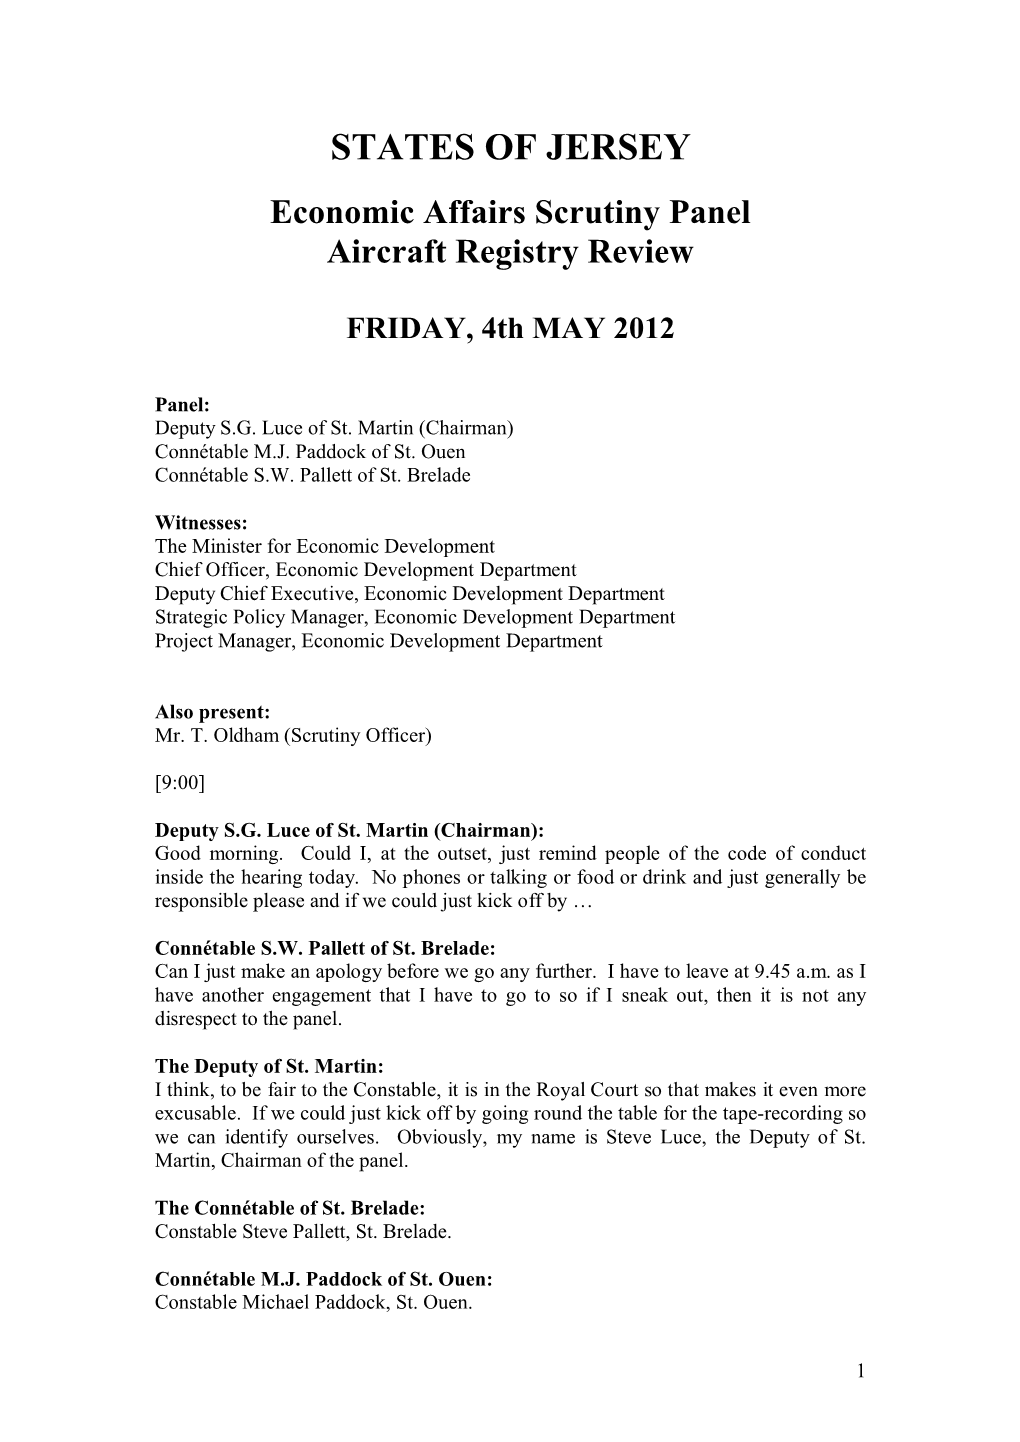 Aircraft Registry Review